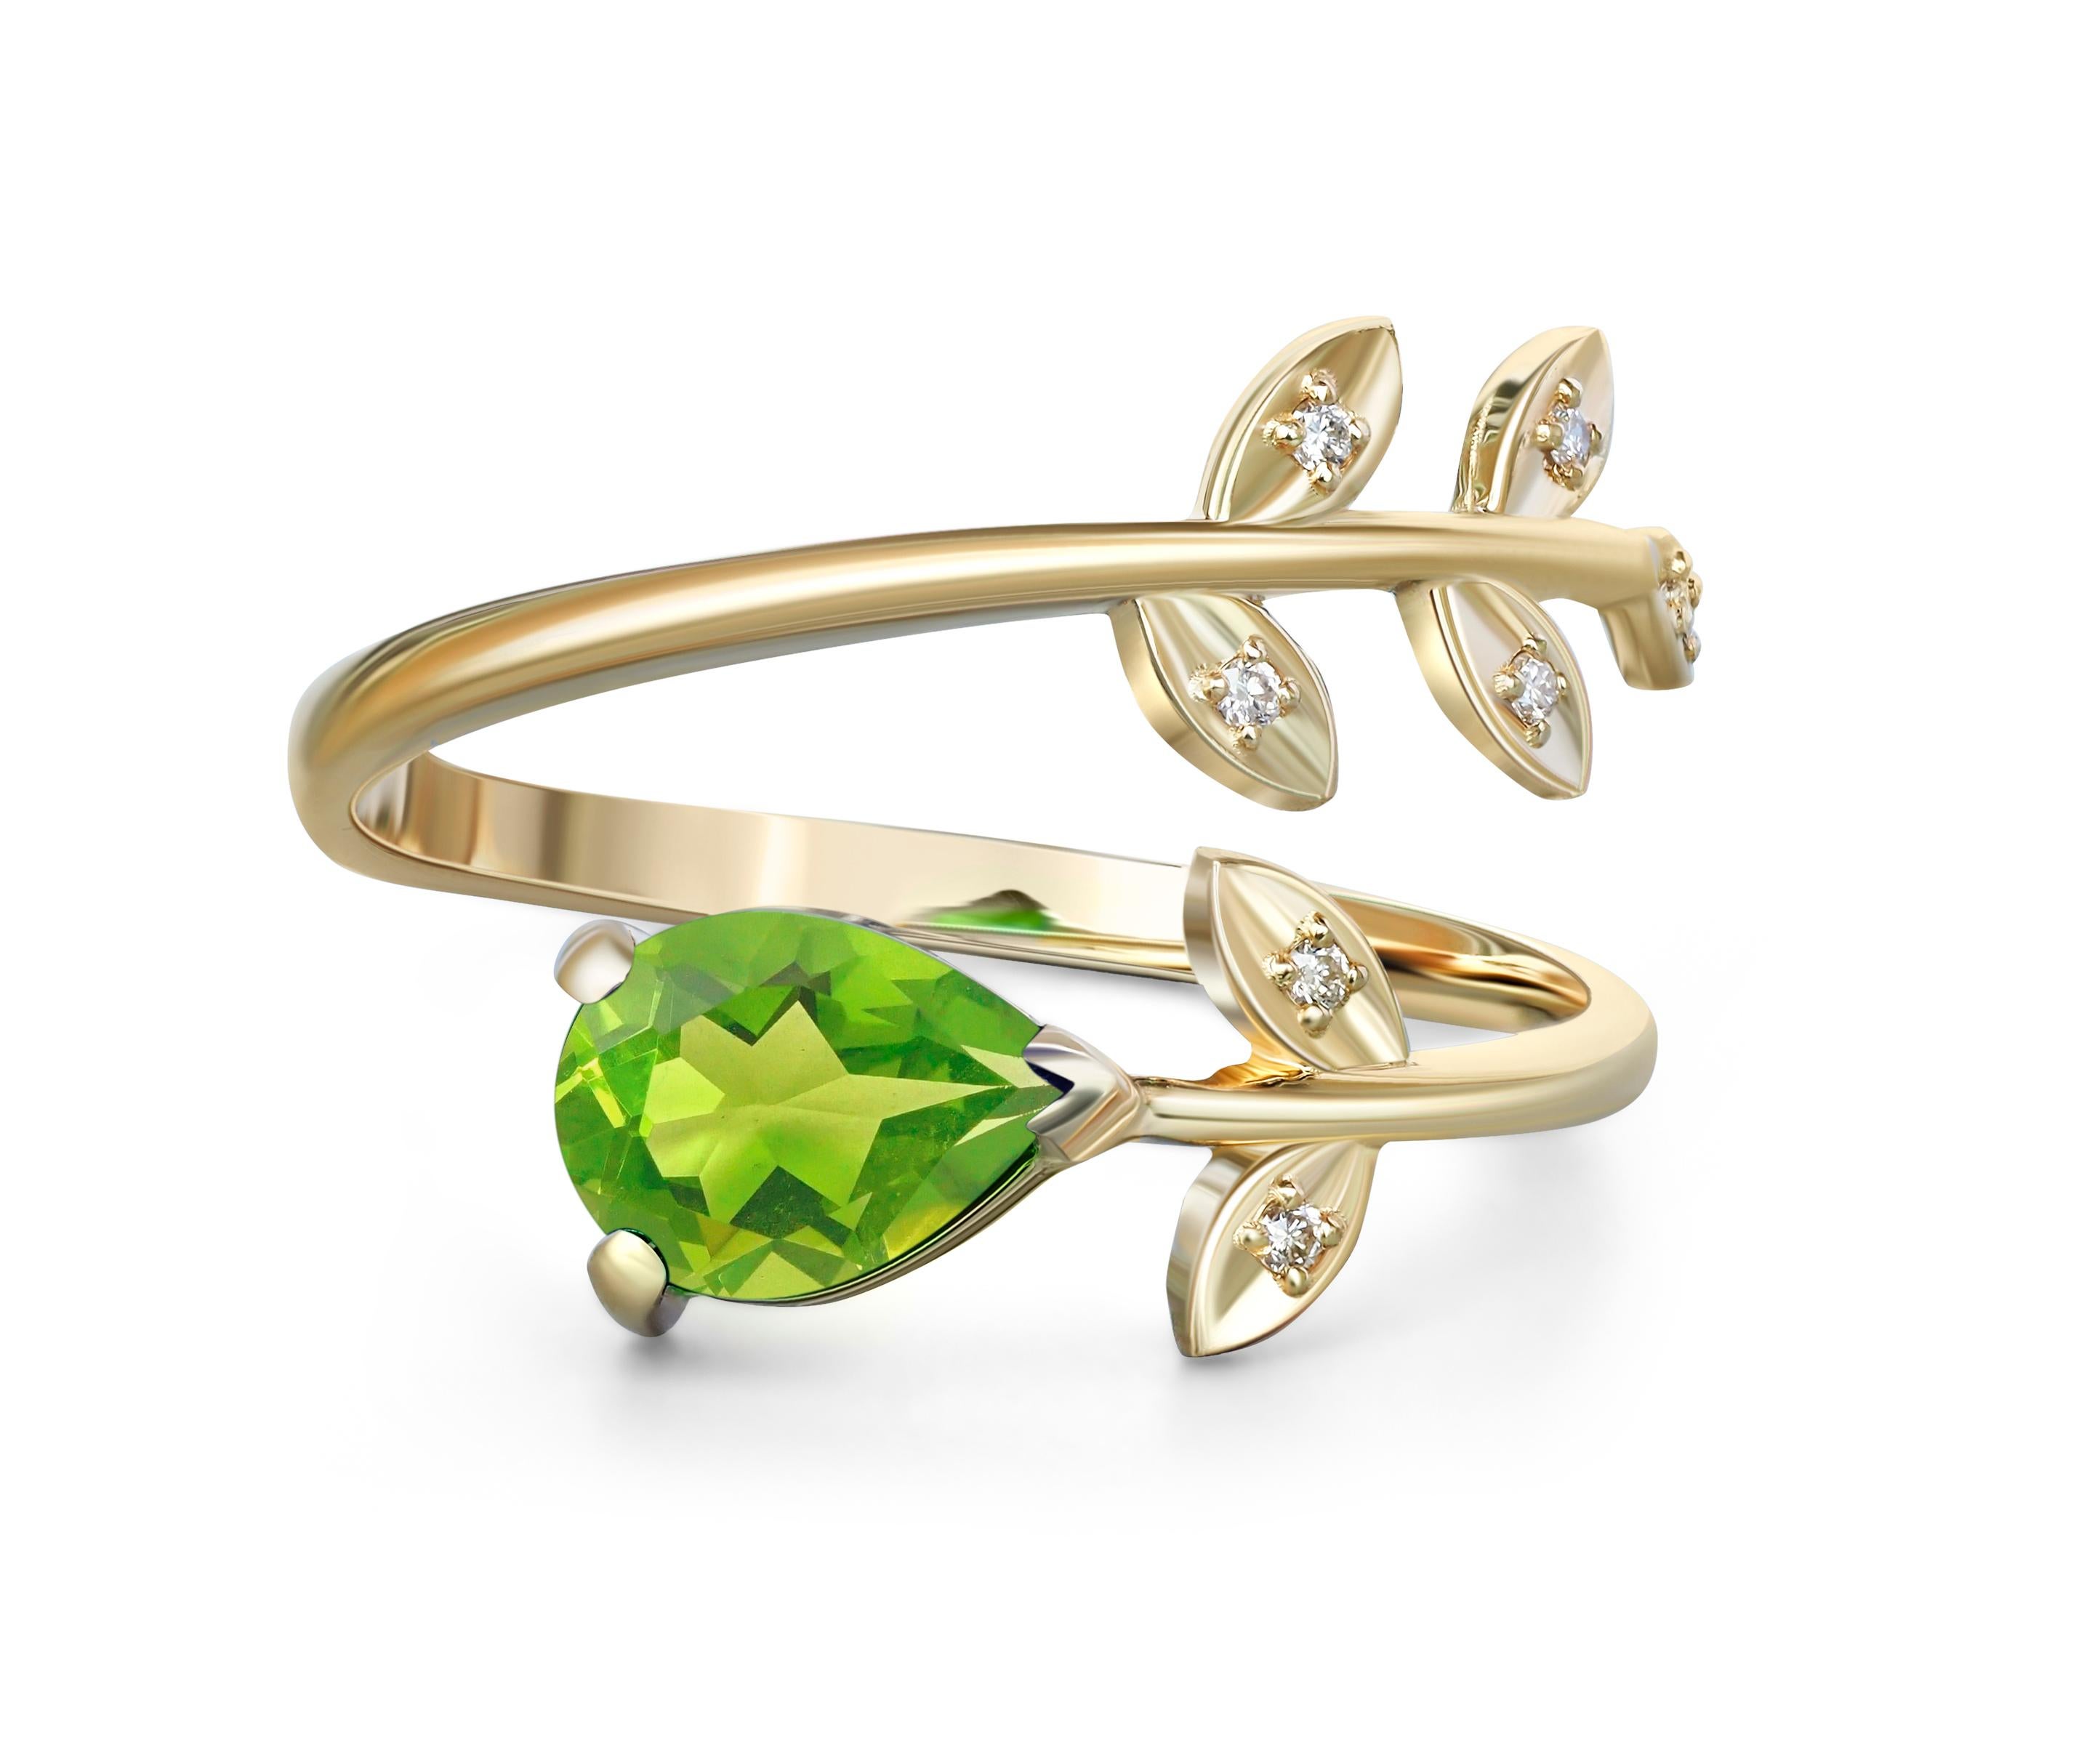 Pear Peridot 14k gold ring. 
Peridot gold ring. Genuine Peridot ring. Gold leaves ring. Peridot leaves ring. Floral gold ring.

Metal: 14 k gold
Weight: 2 g. depends from size.

Set with Peridot: pear shape, approx 0.8 ct, apple green 